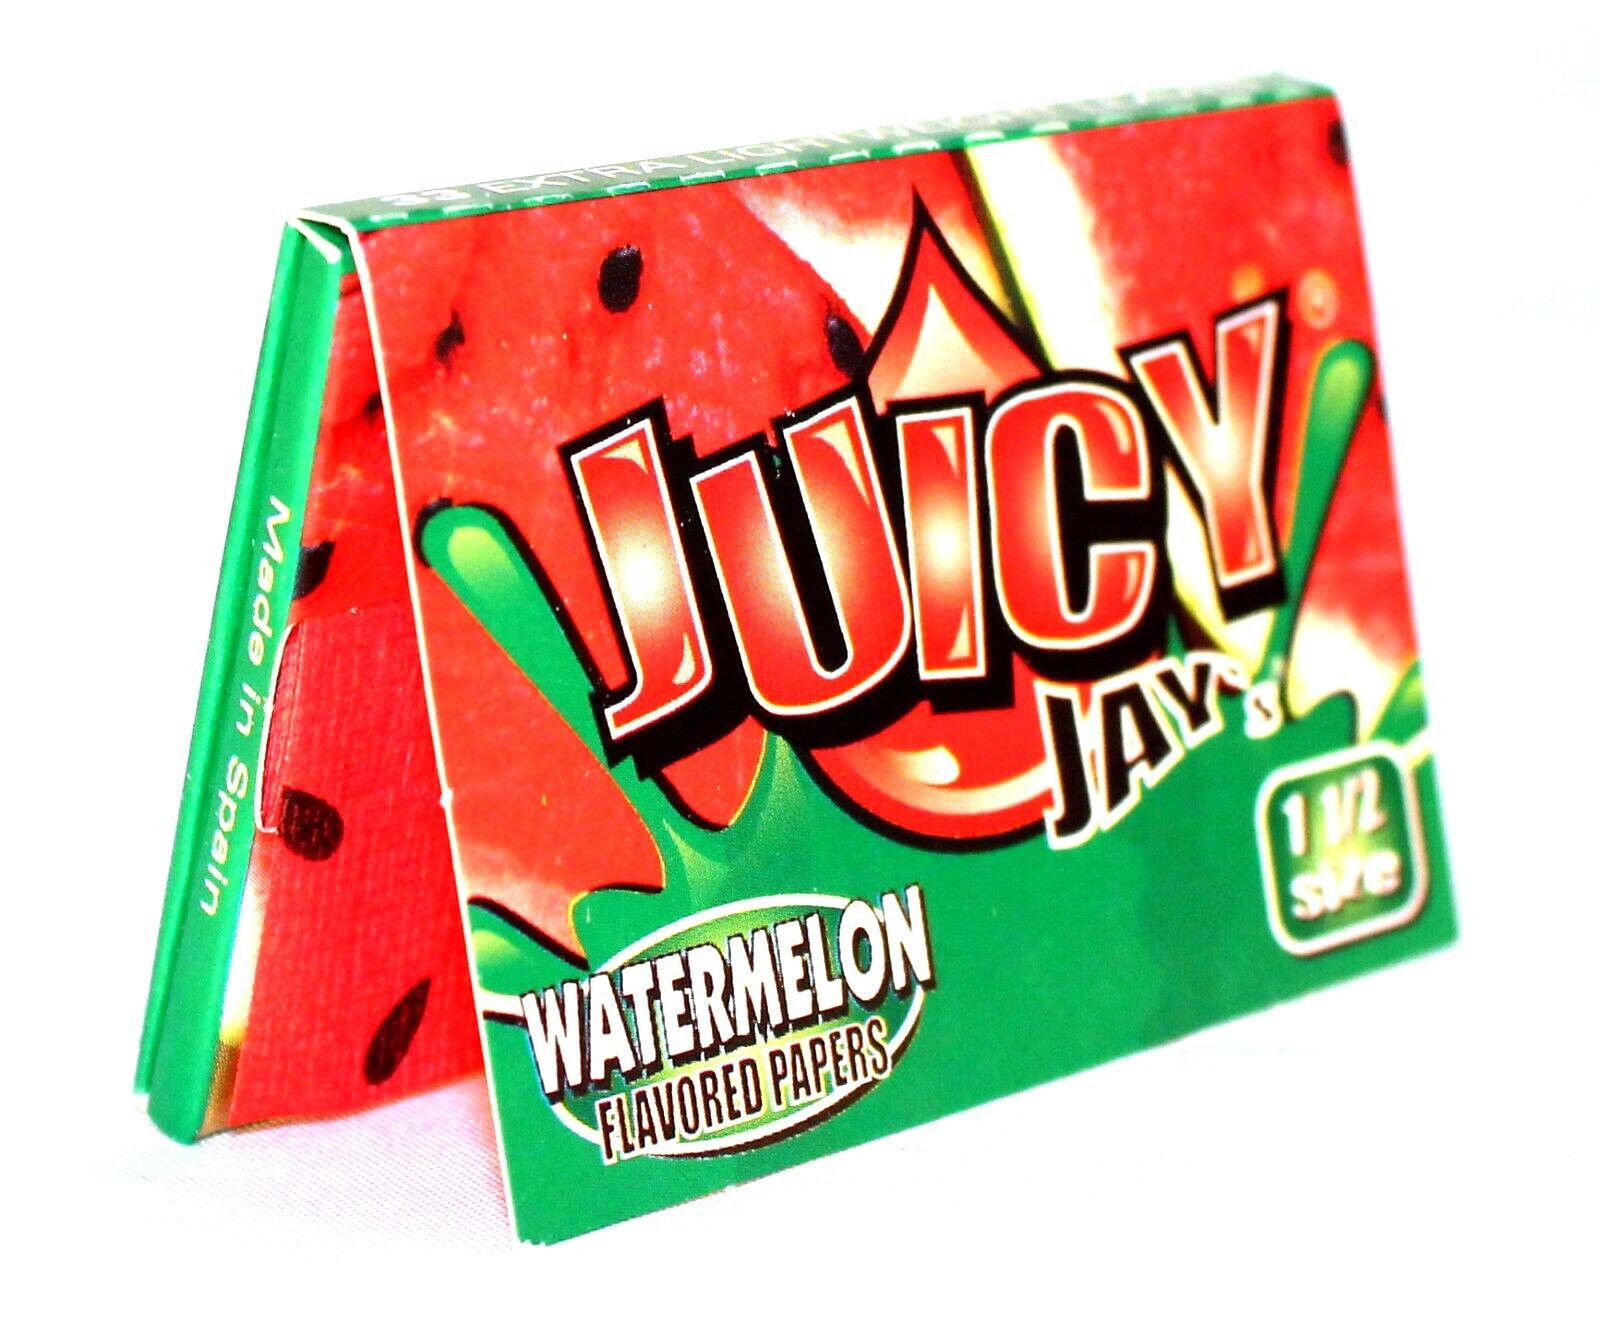 6 packs 1.5 size Juicy Jay's Watermelon Flavored Cigarette Rolling Papers 1 1/2